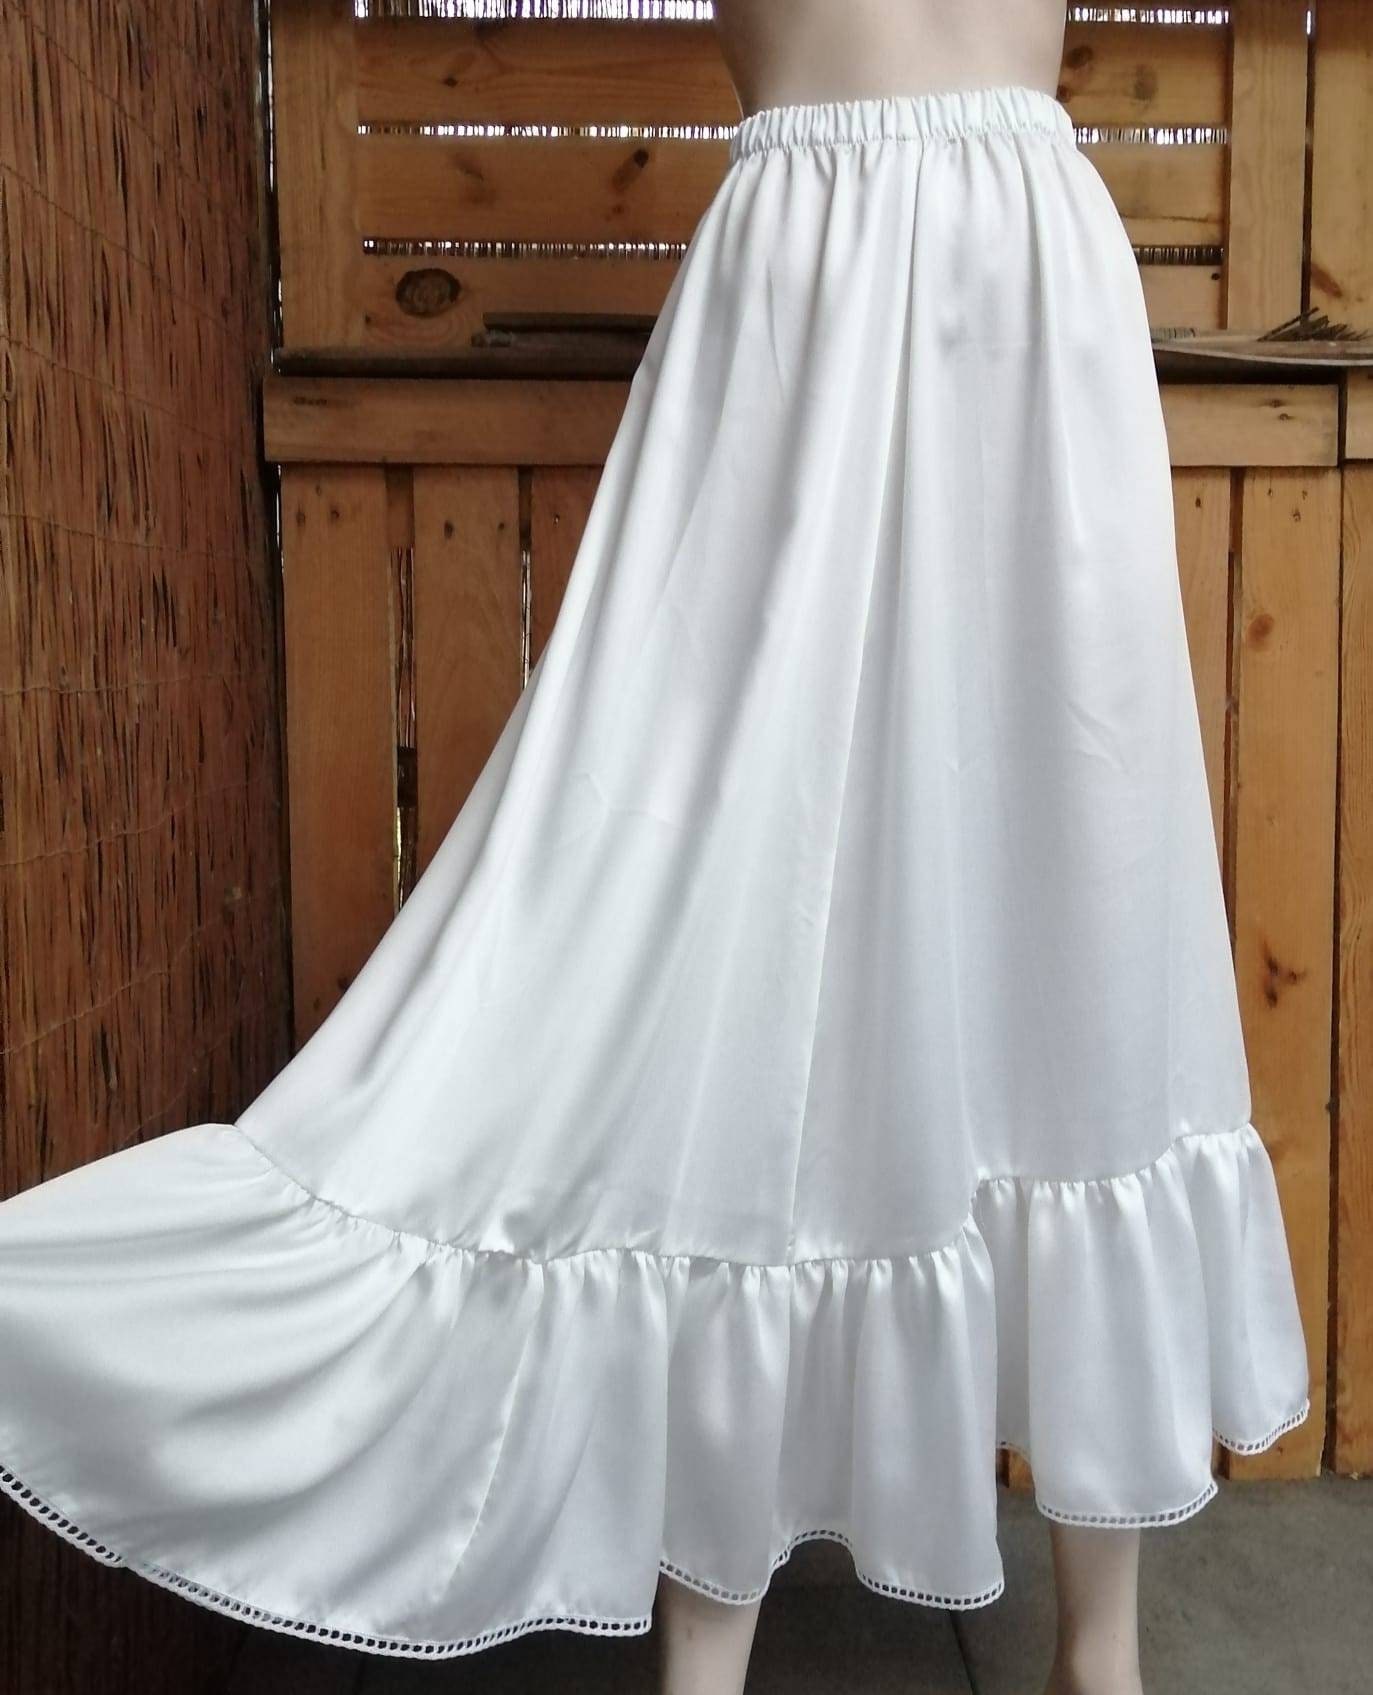 Ankle-length Cotton Petticoat Slip With Ruffled Lace Hem Ideal A-line  Wedding Underskirt for Formal Dresses 